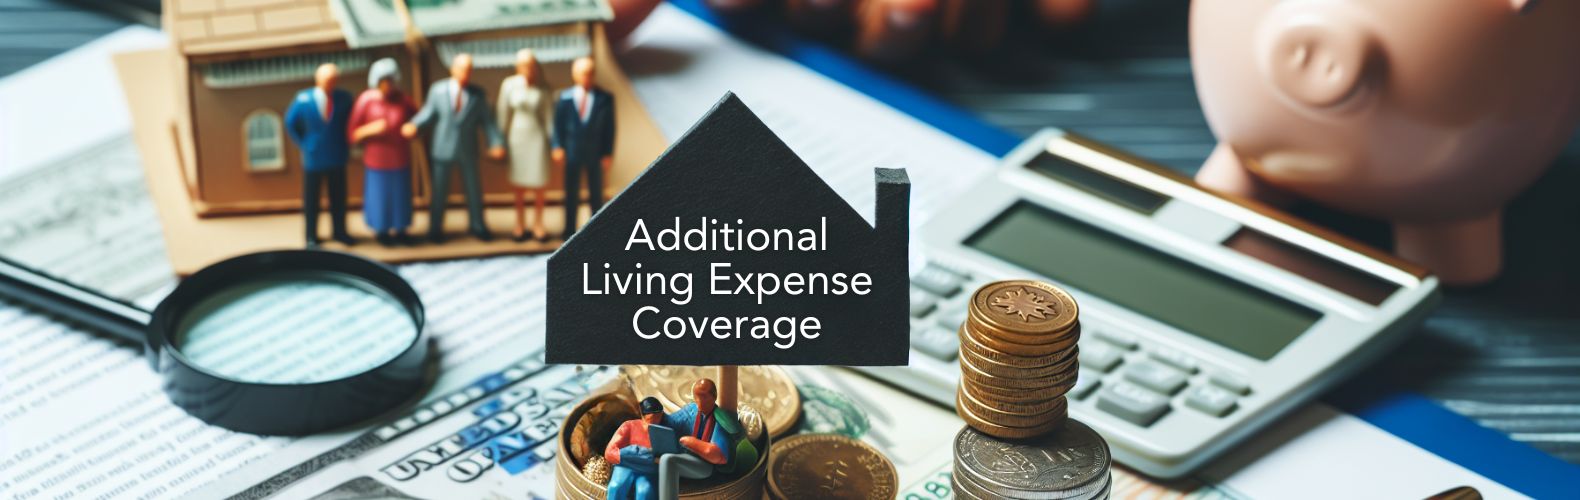 statues of little people standing on money. A calculator and magnify glass on a table. A sign that looks like a house that says additional living expense coverage